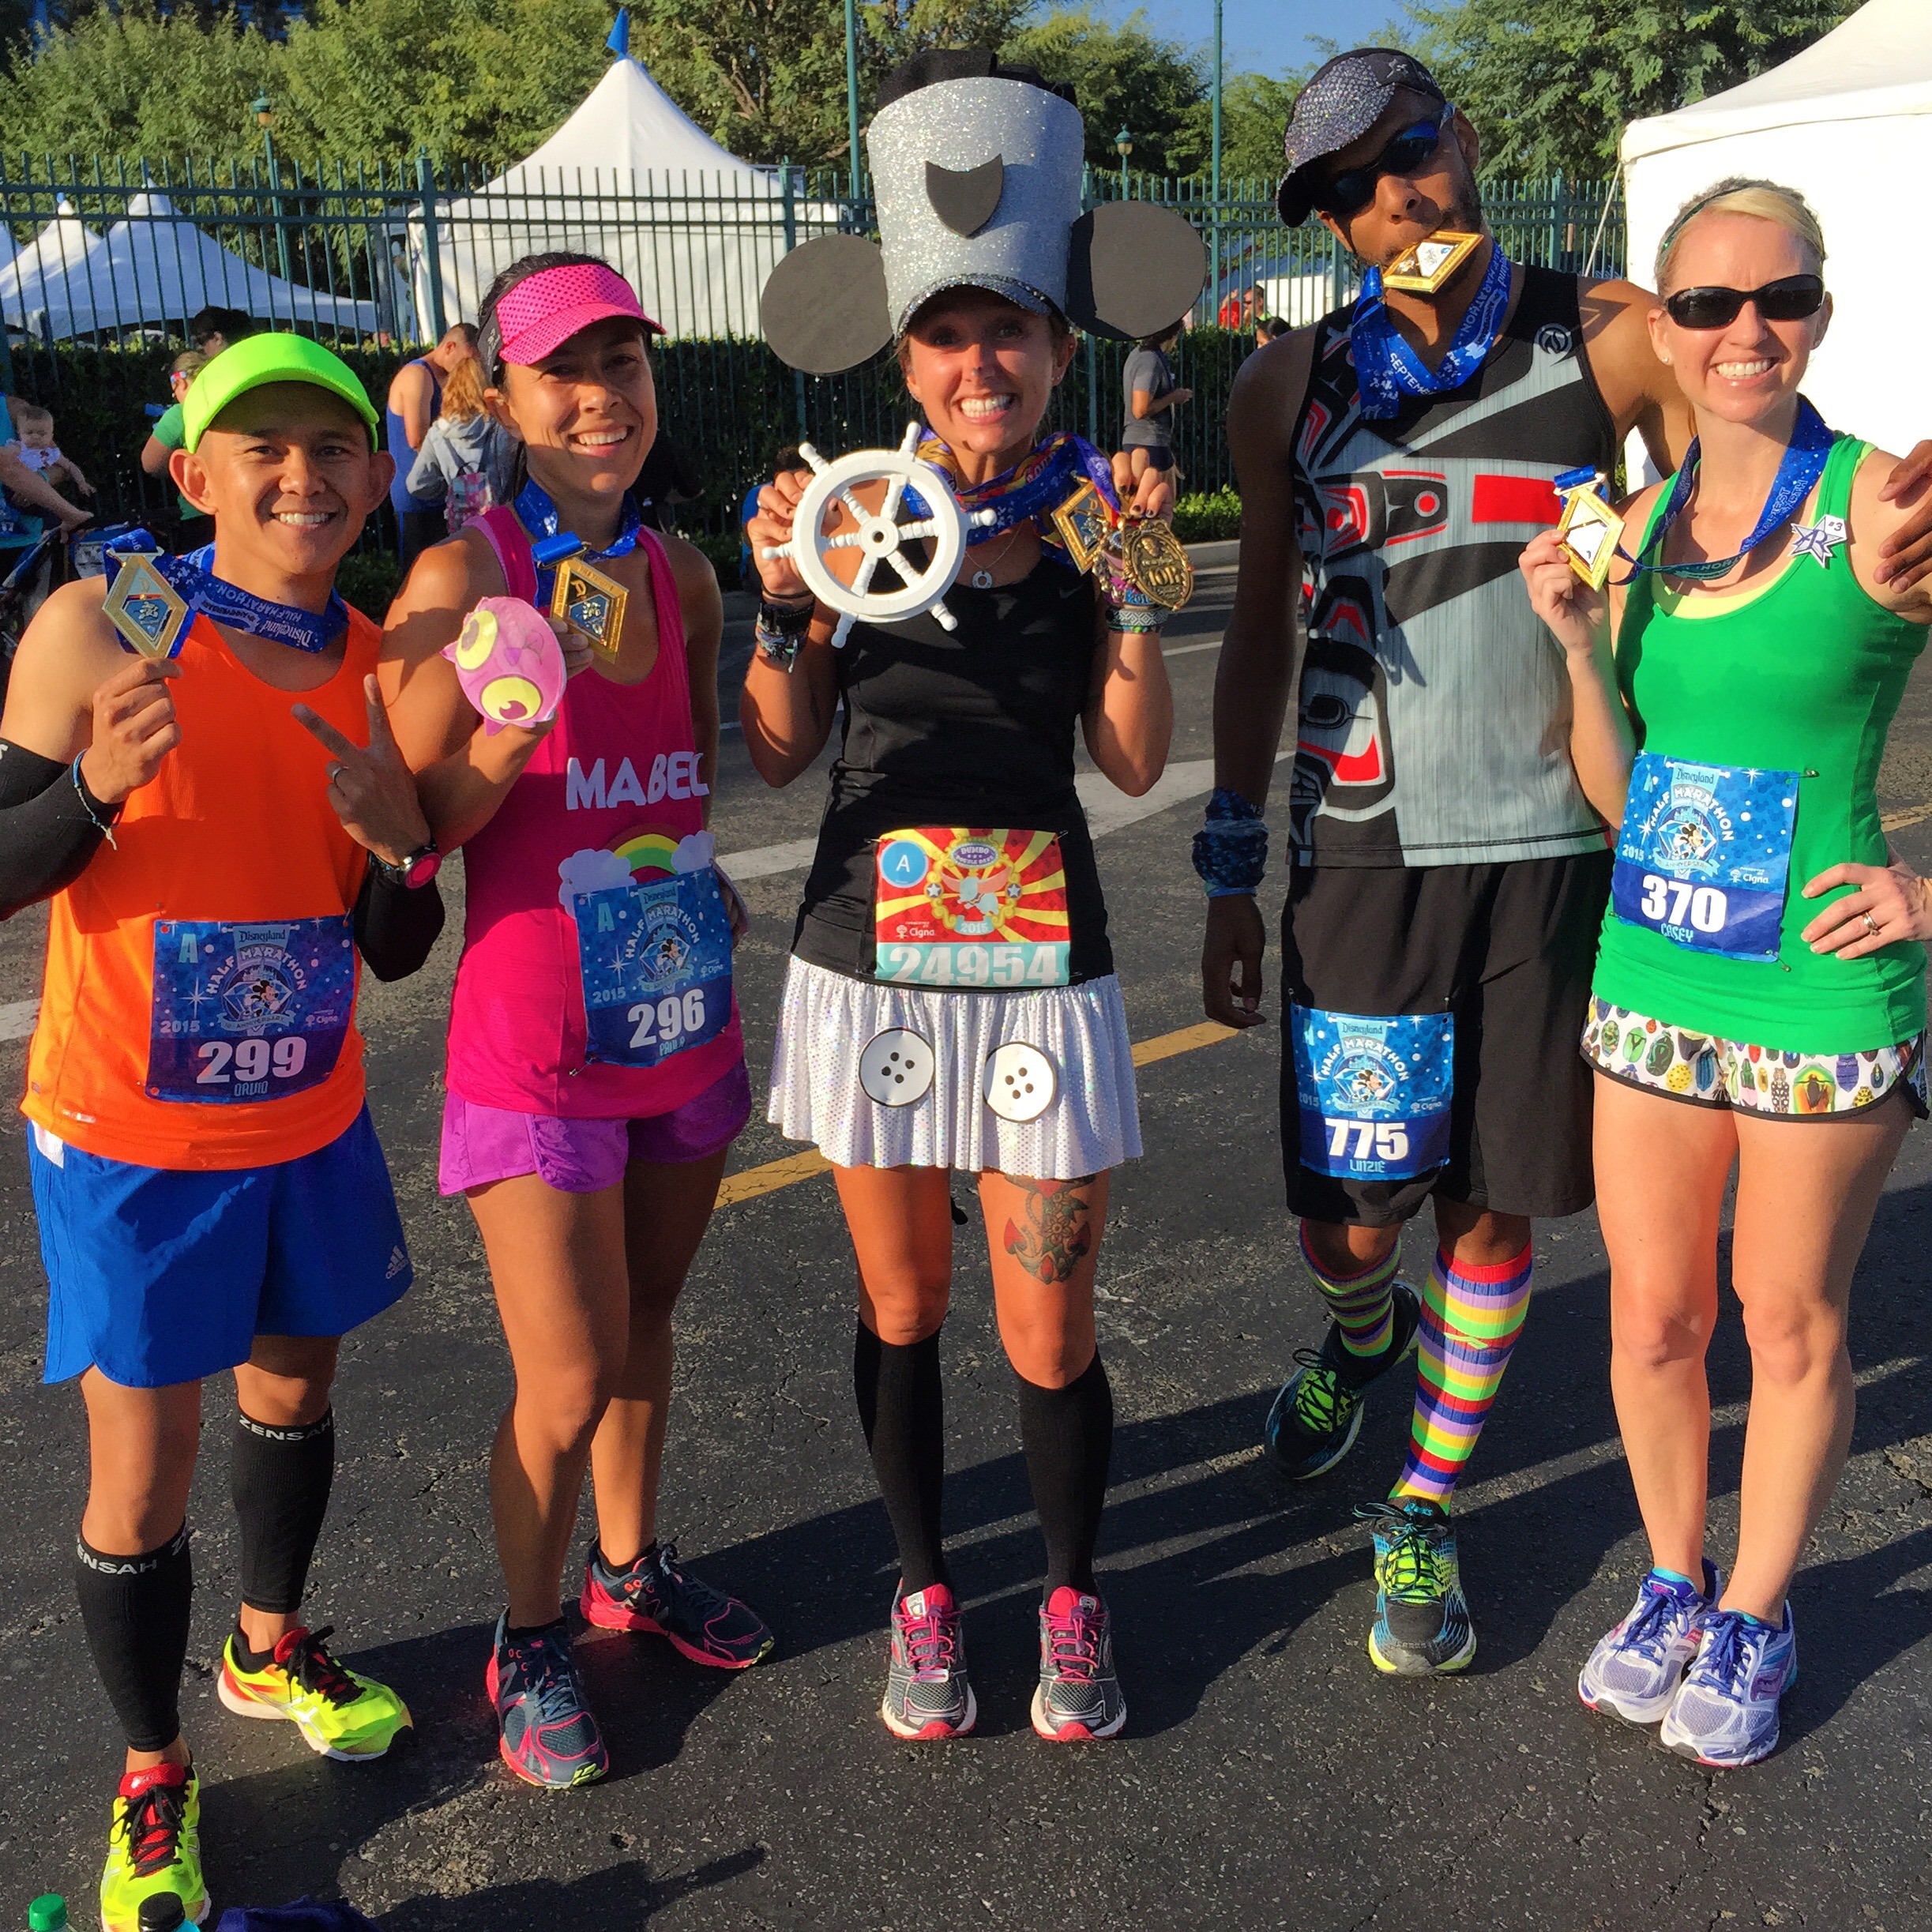  It's  @caseyruns  and some of the  @werunsocial  after killing it on the Disneyland Half Marathon course!&nbsp; 